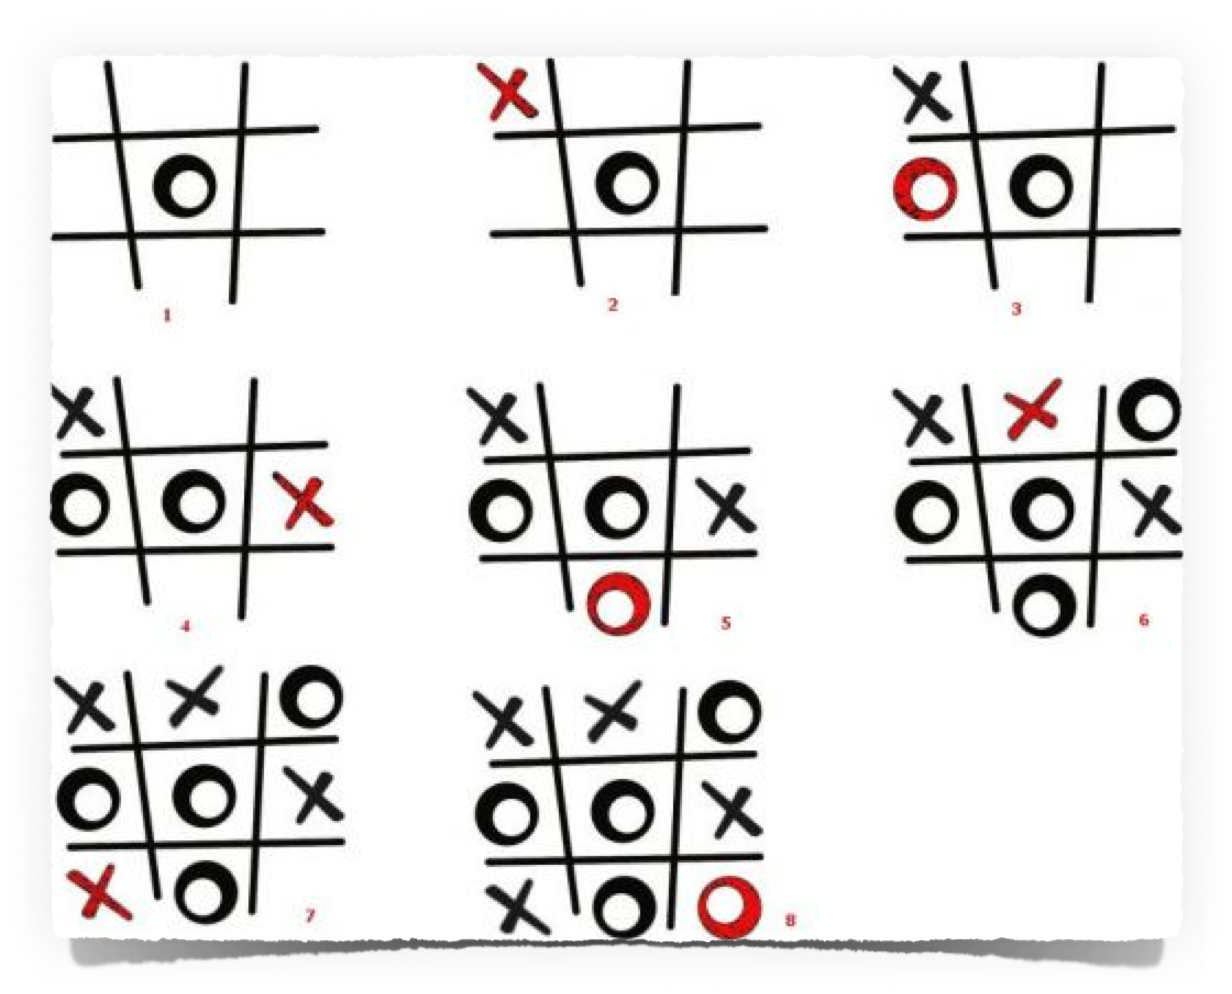 Playing Games become boring when you can't learn how to improve, like Tic-Tac-Toe